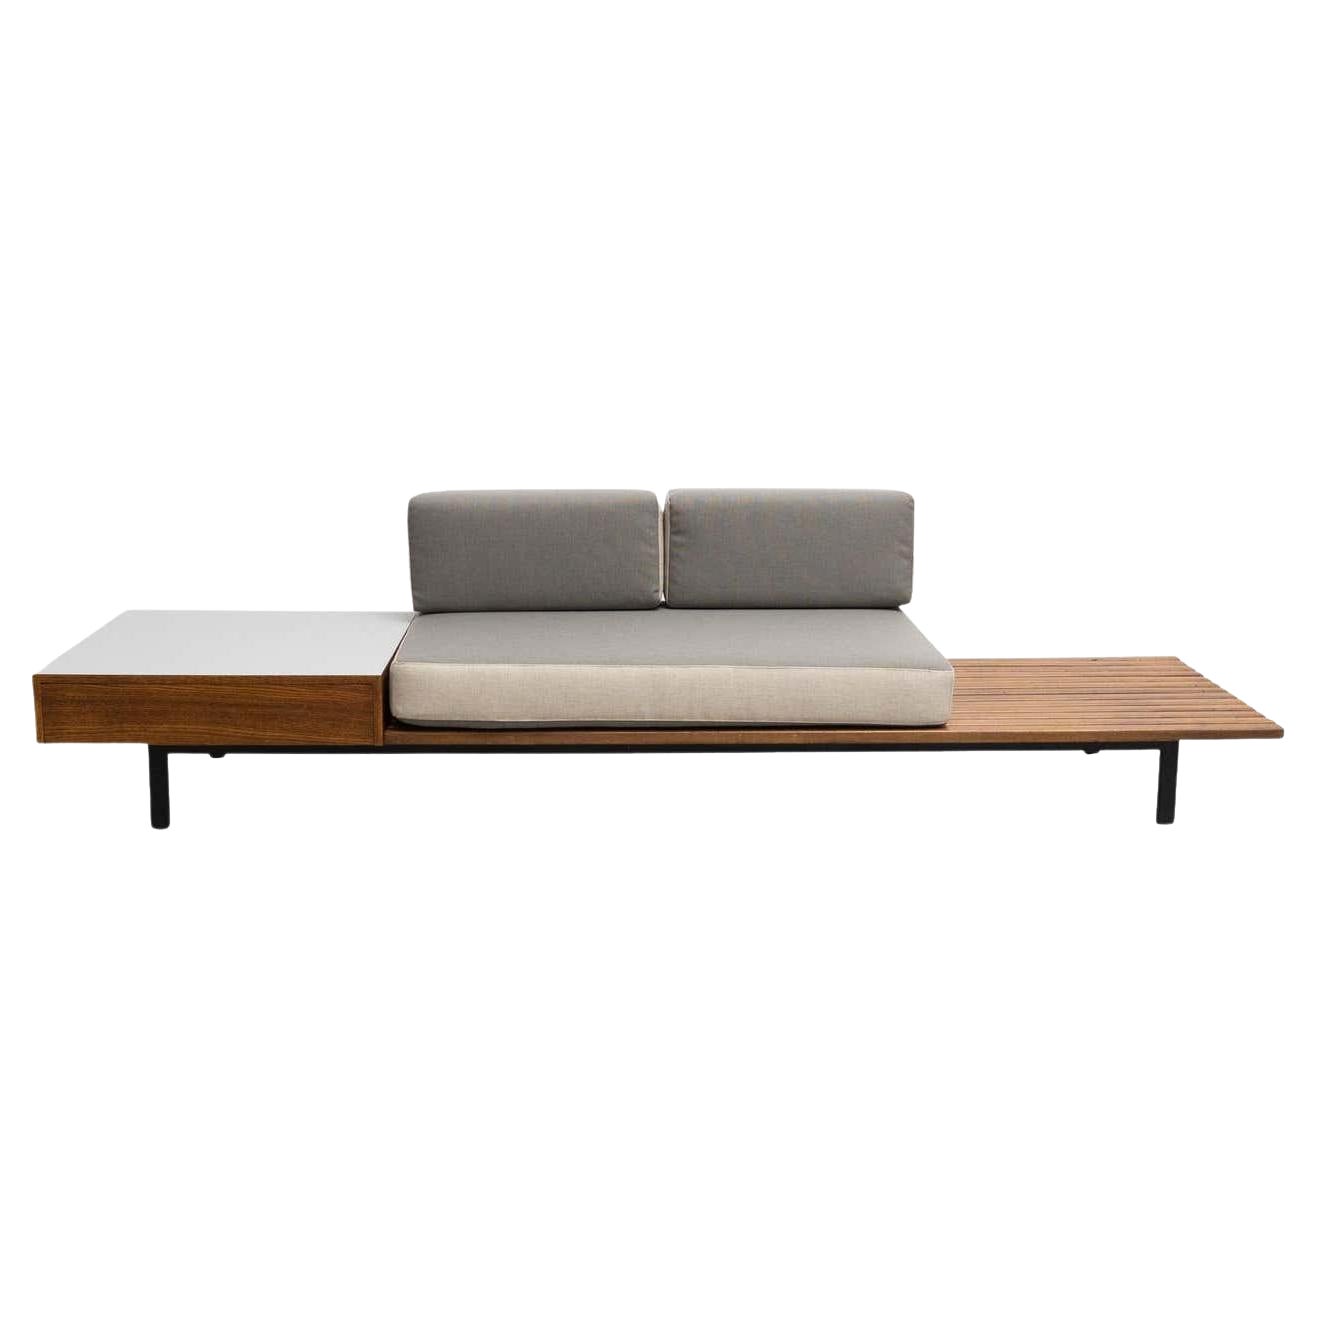 Charlotte Perriand Cansado Bench with a Drawer, circa 1958 For Sale